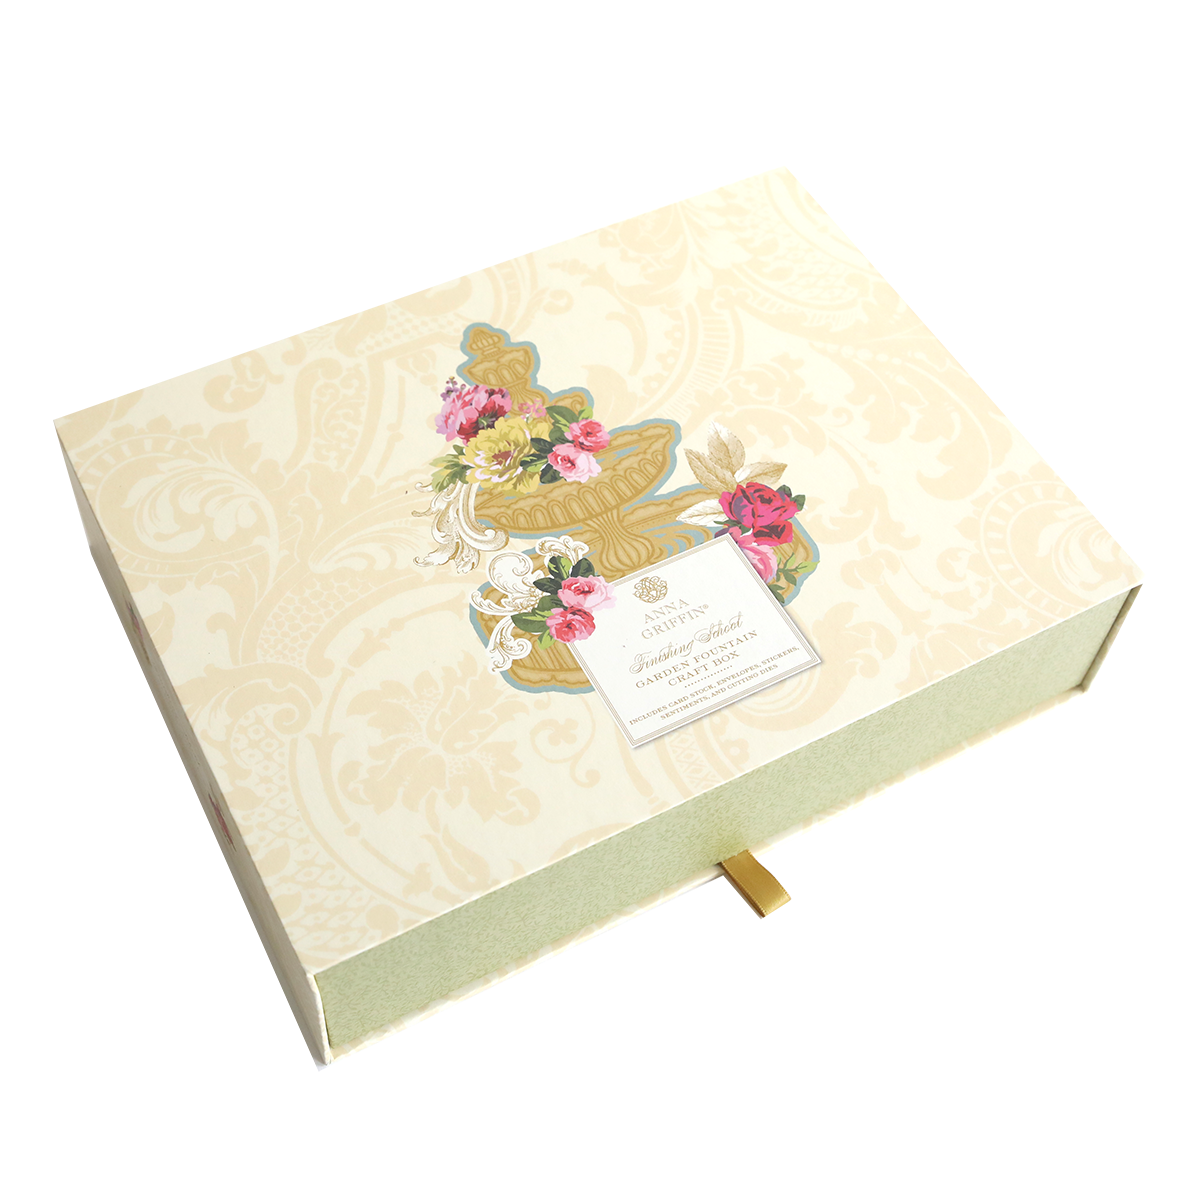 A craft box with a floral design on it, perfect for Garden Fountain Easel Finishing School Kit cards or as a gift box for Anna Griffin SEO keywords: Garden Fountain Easel Cards.